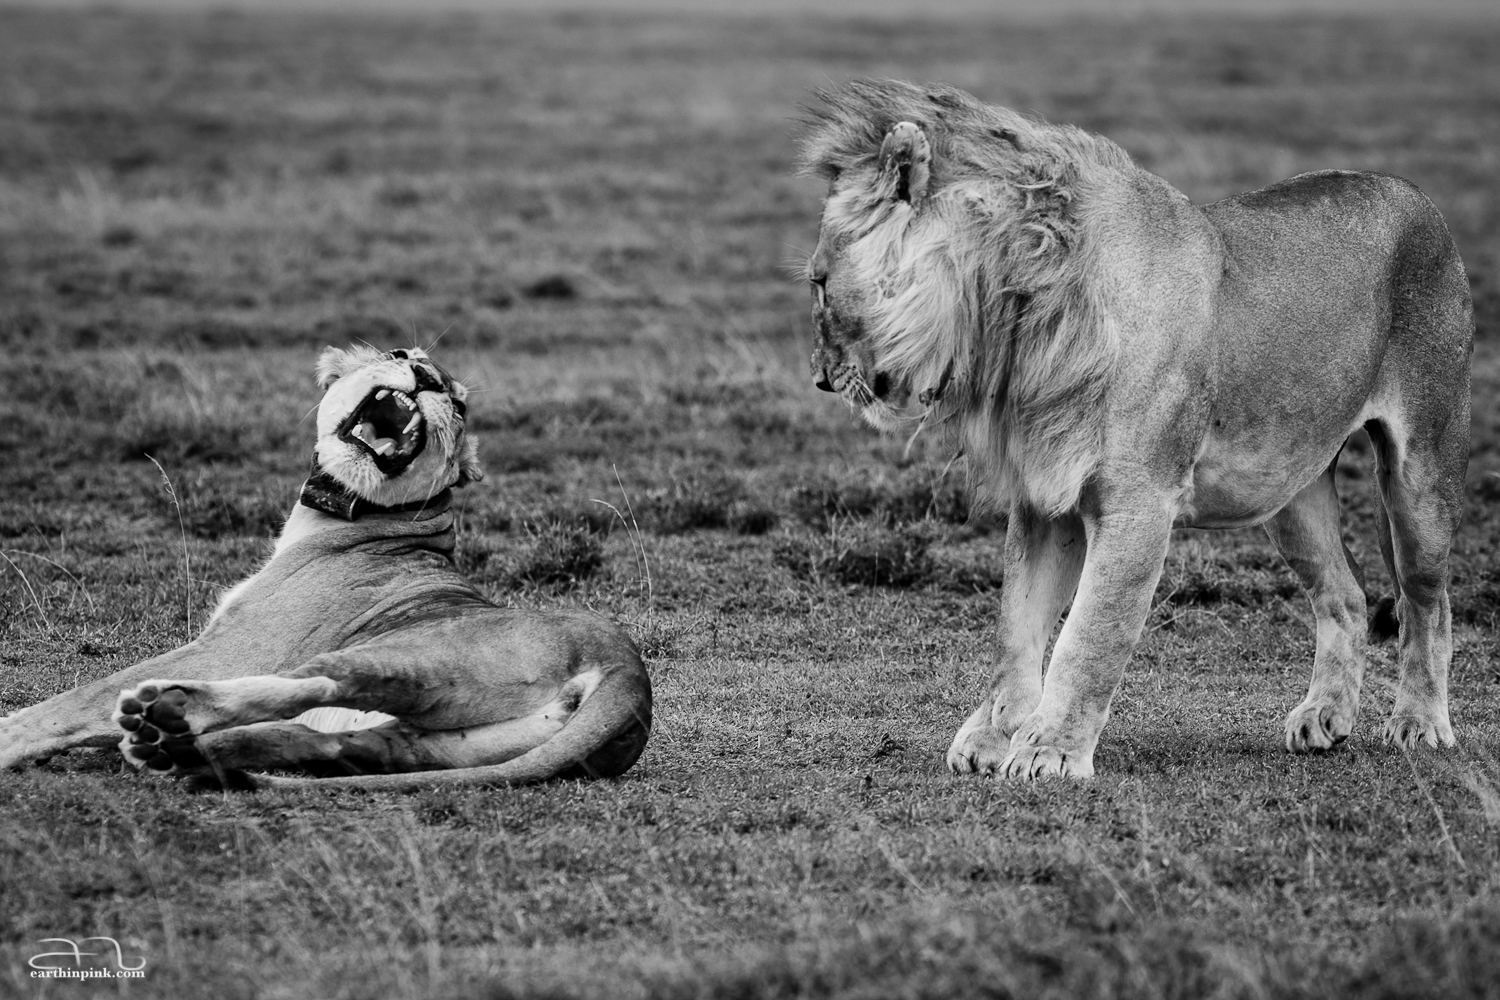 Lioness turns down male lion's advances near the entrance of Serengeti National Park, Tanzania